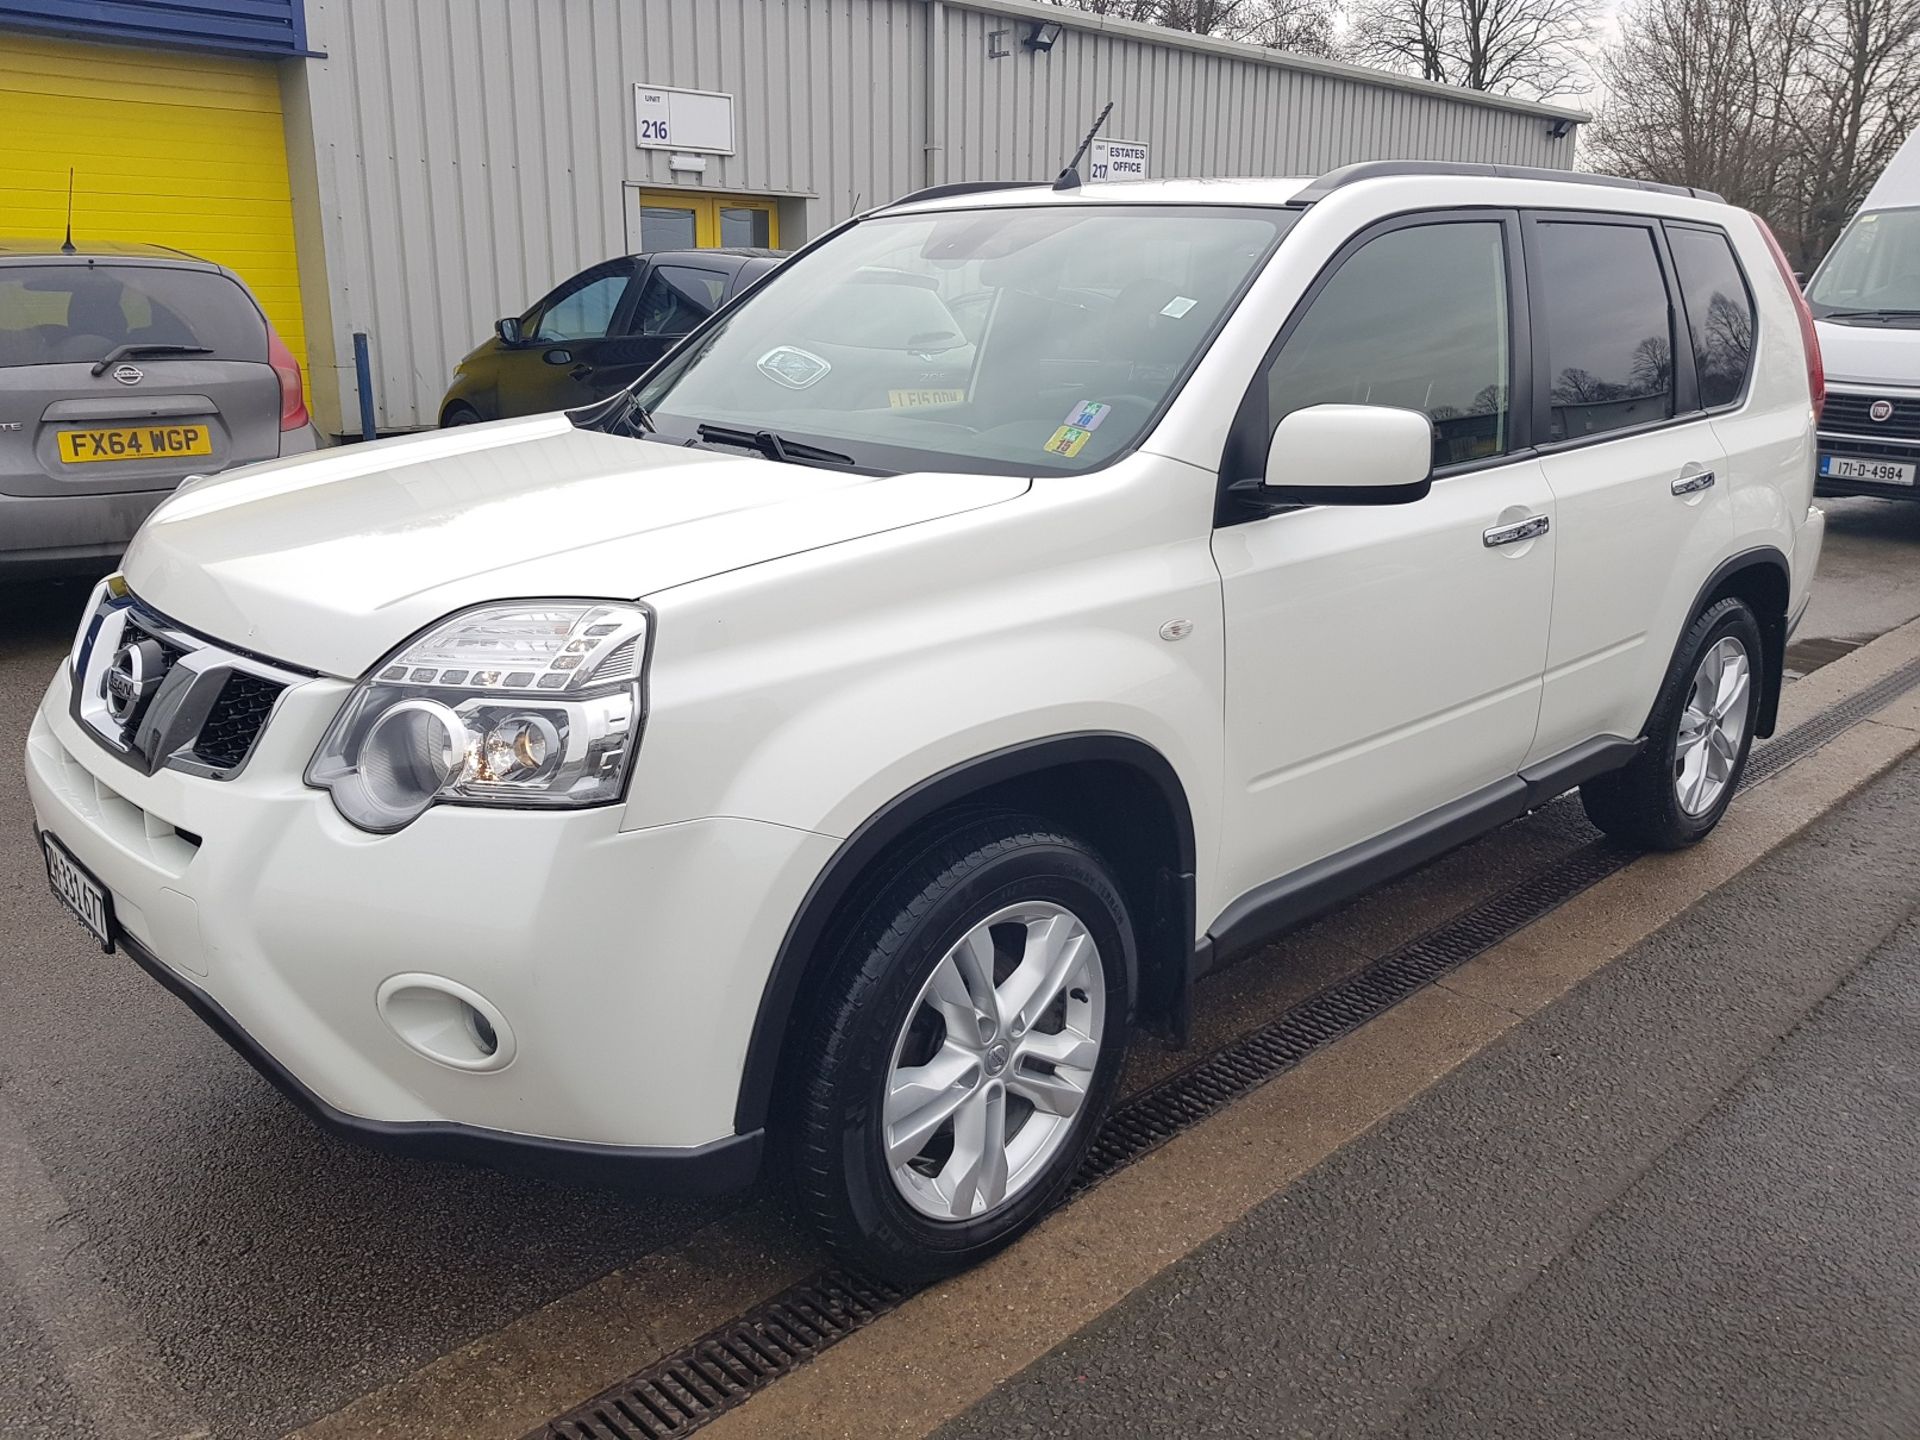 2012 NISSAN X-TRAIL 4X4 2.0 DIESEL AUTOMATIC, LEFT HAND DRIVE - REGISTERED IN SWITZERLAND *NO VAT* - Image 3 of 20